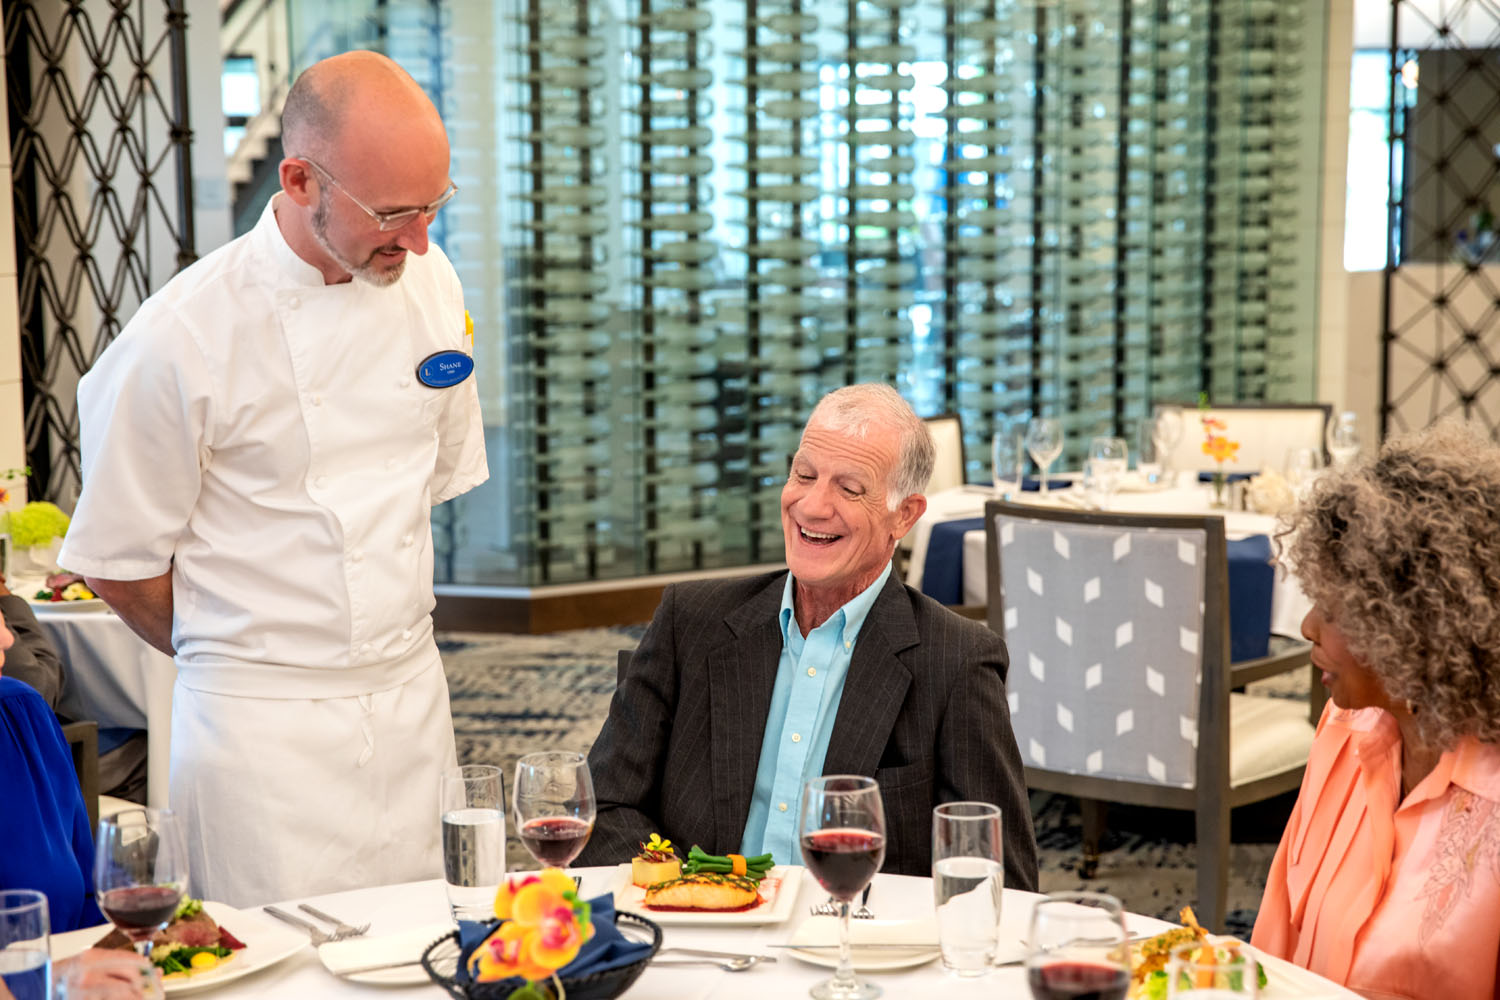 Summit chef talking to resident at dinner table